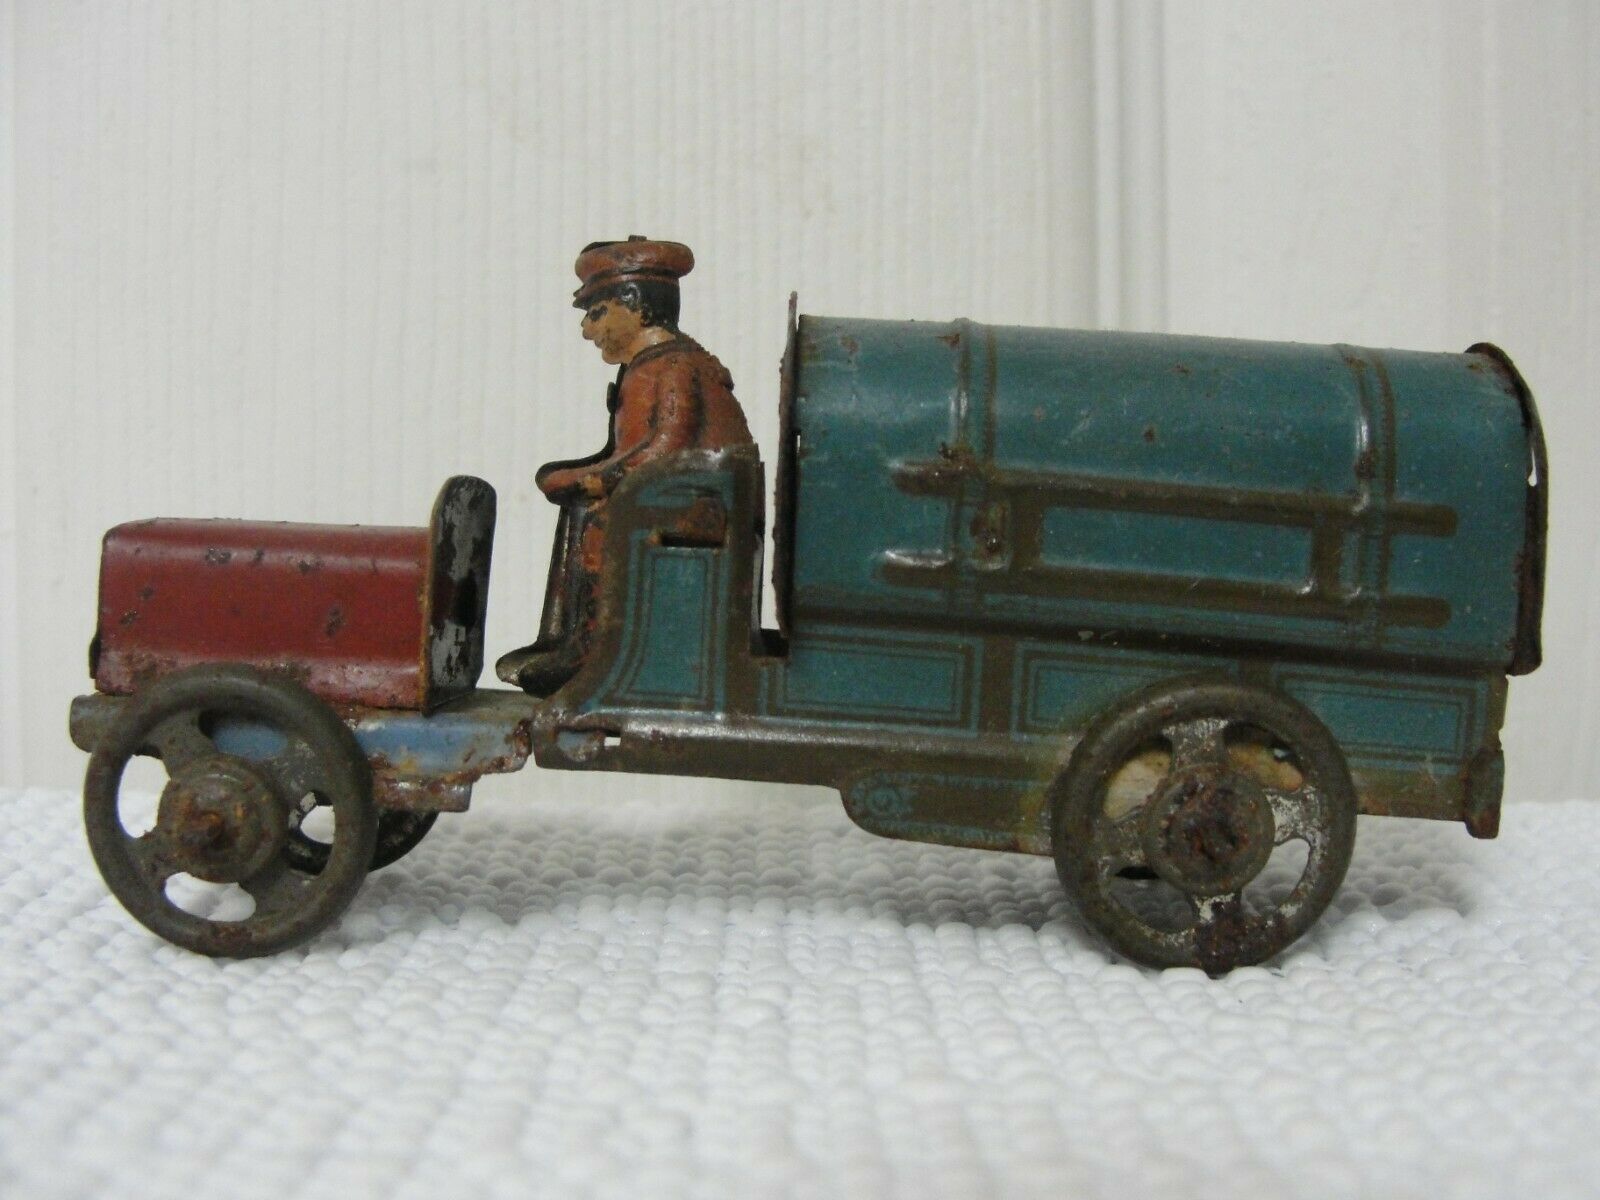 Vintage 1920's Tin Penny Toy Tanker Truck Made In Germany